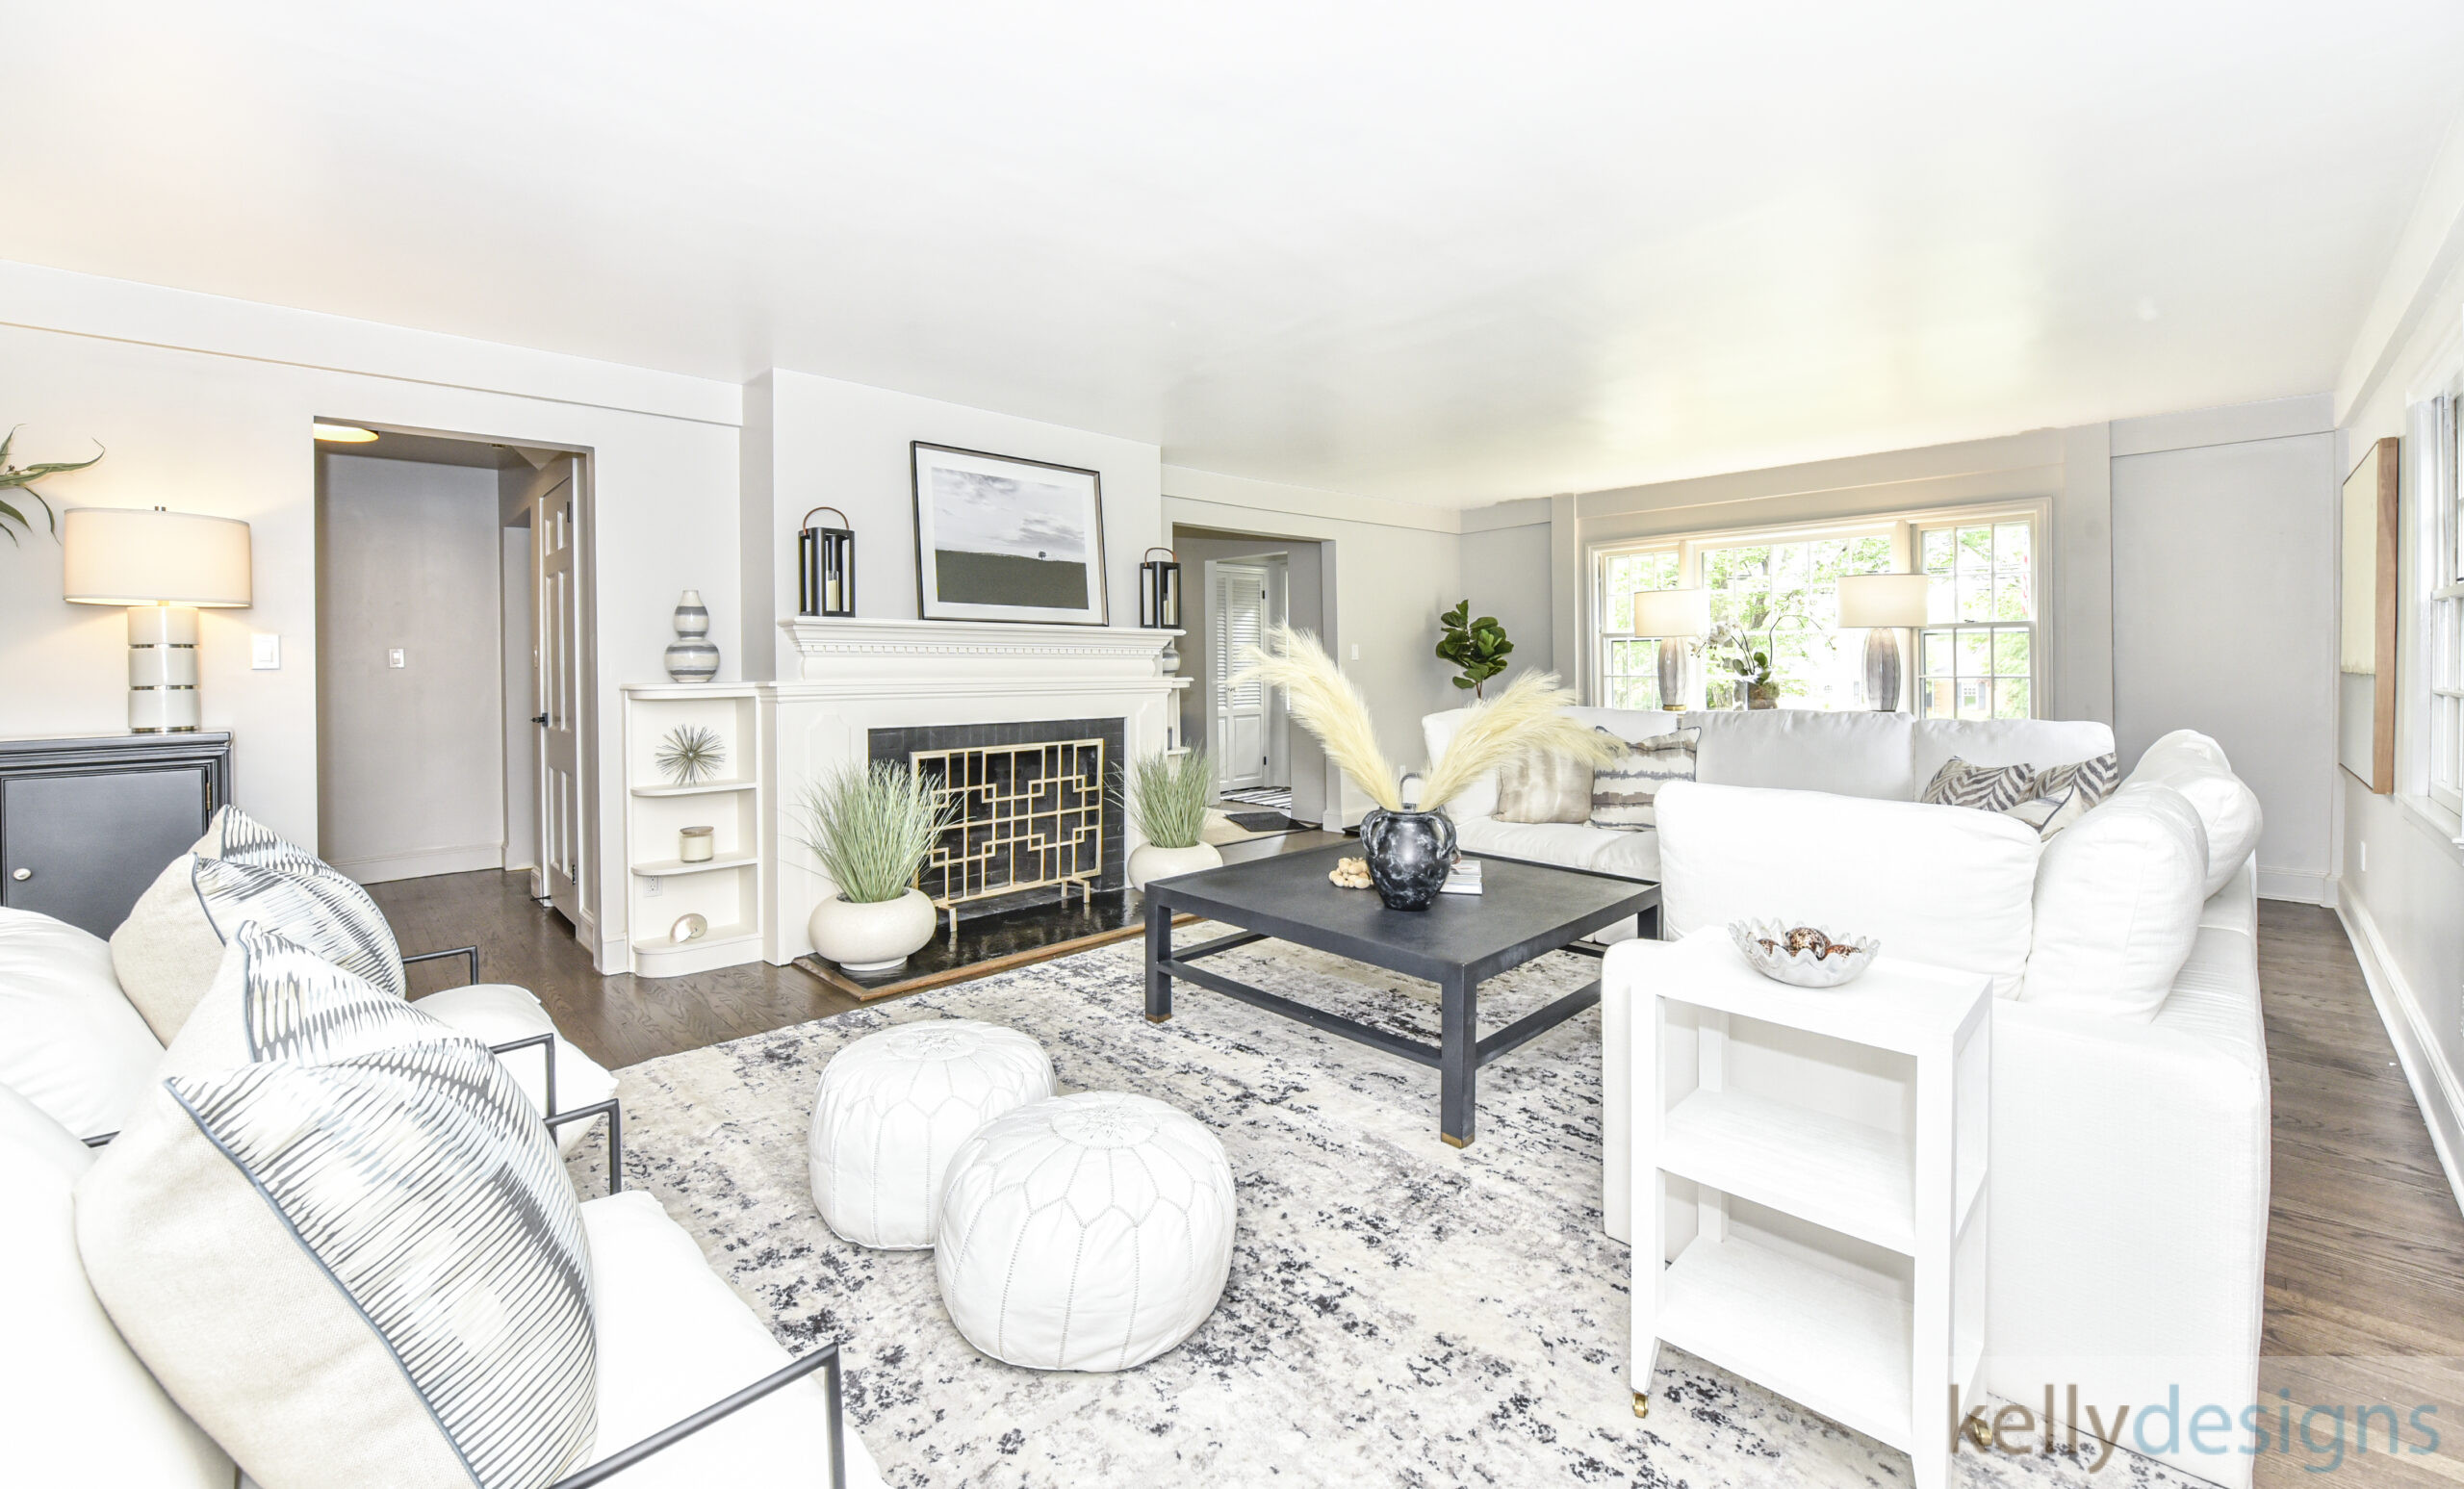 Home Staging on Redding Road by kellydesigns